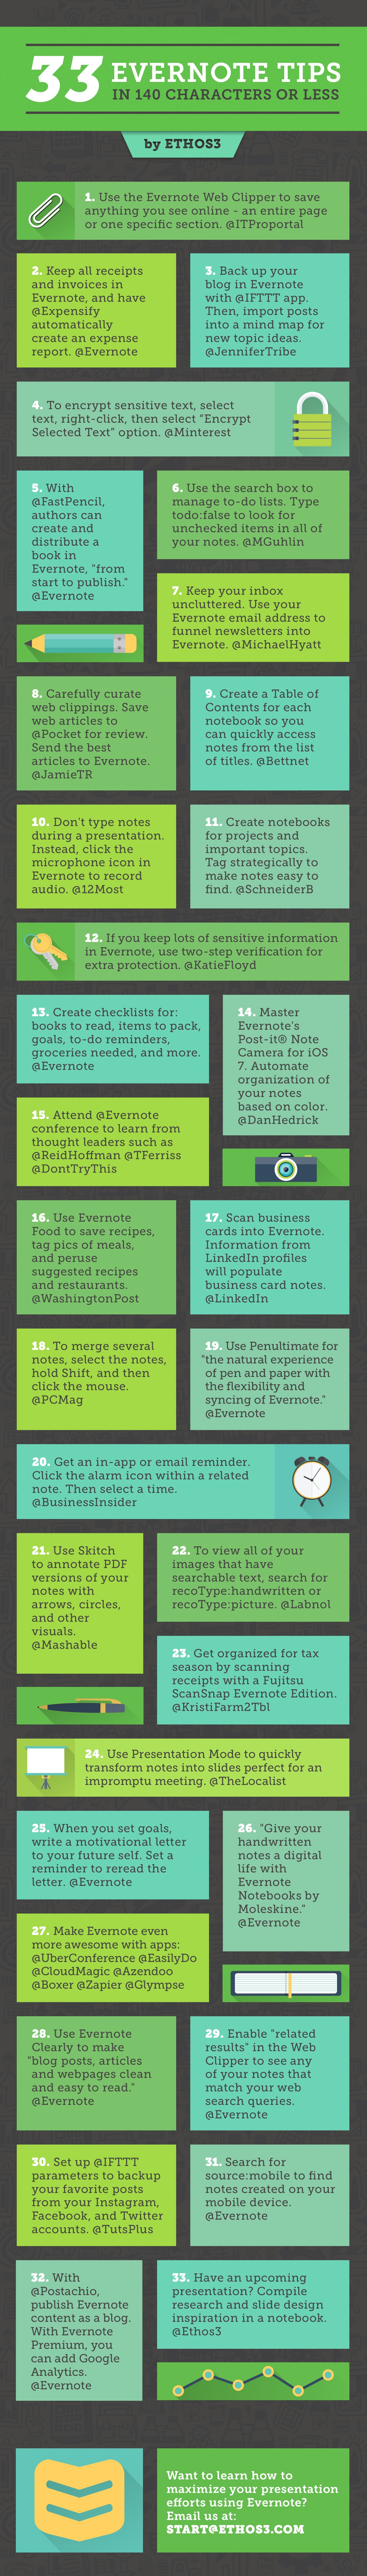 evernote tips